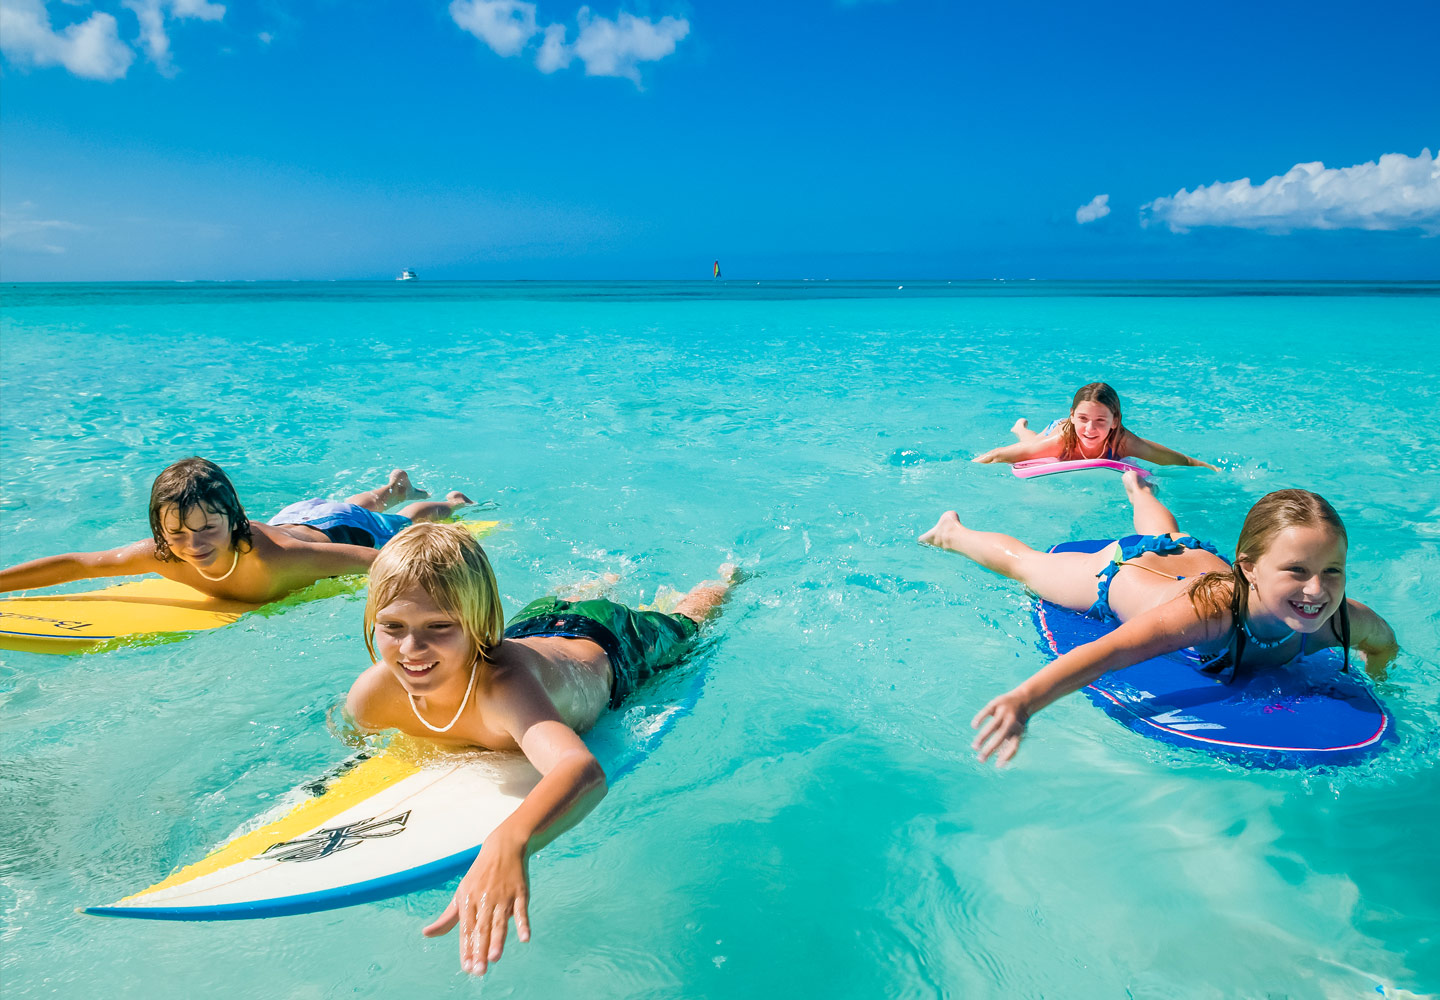 Beaches resorts are great for the whole family